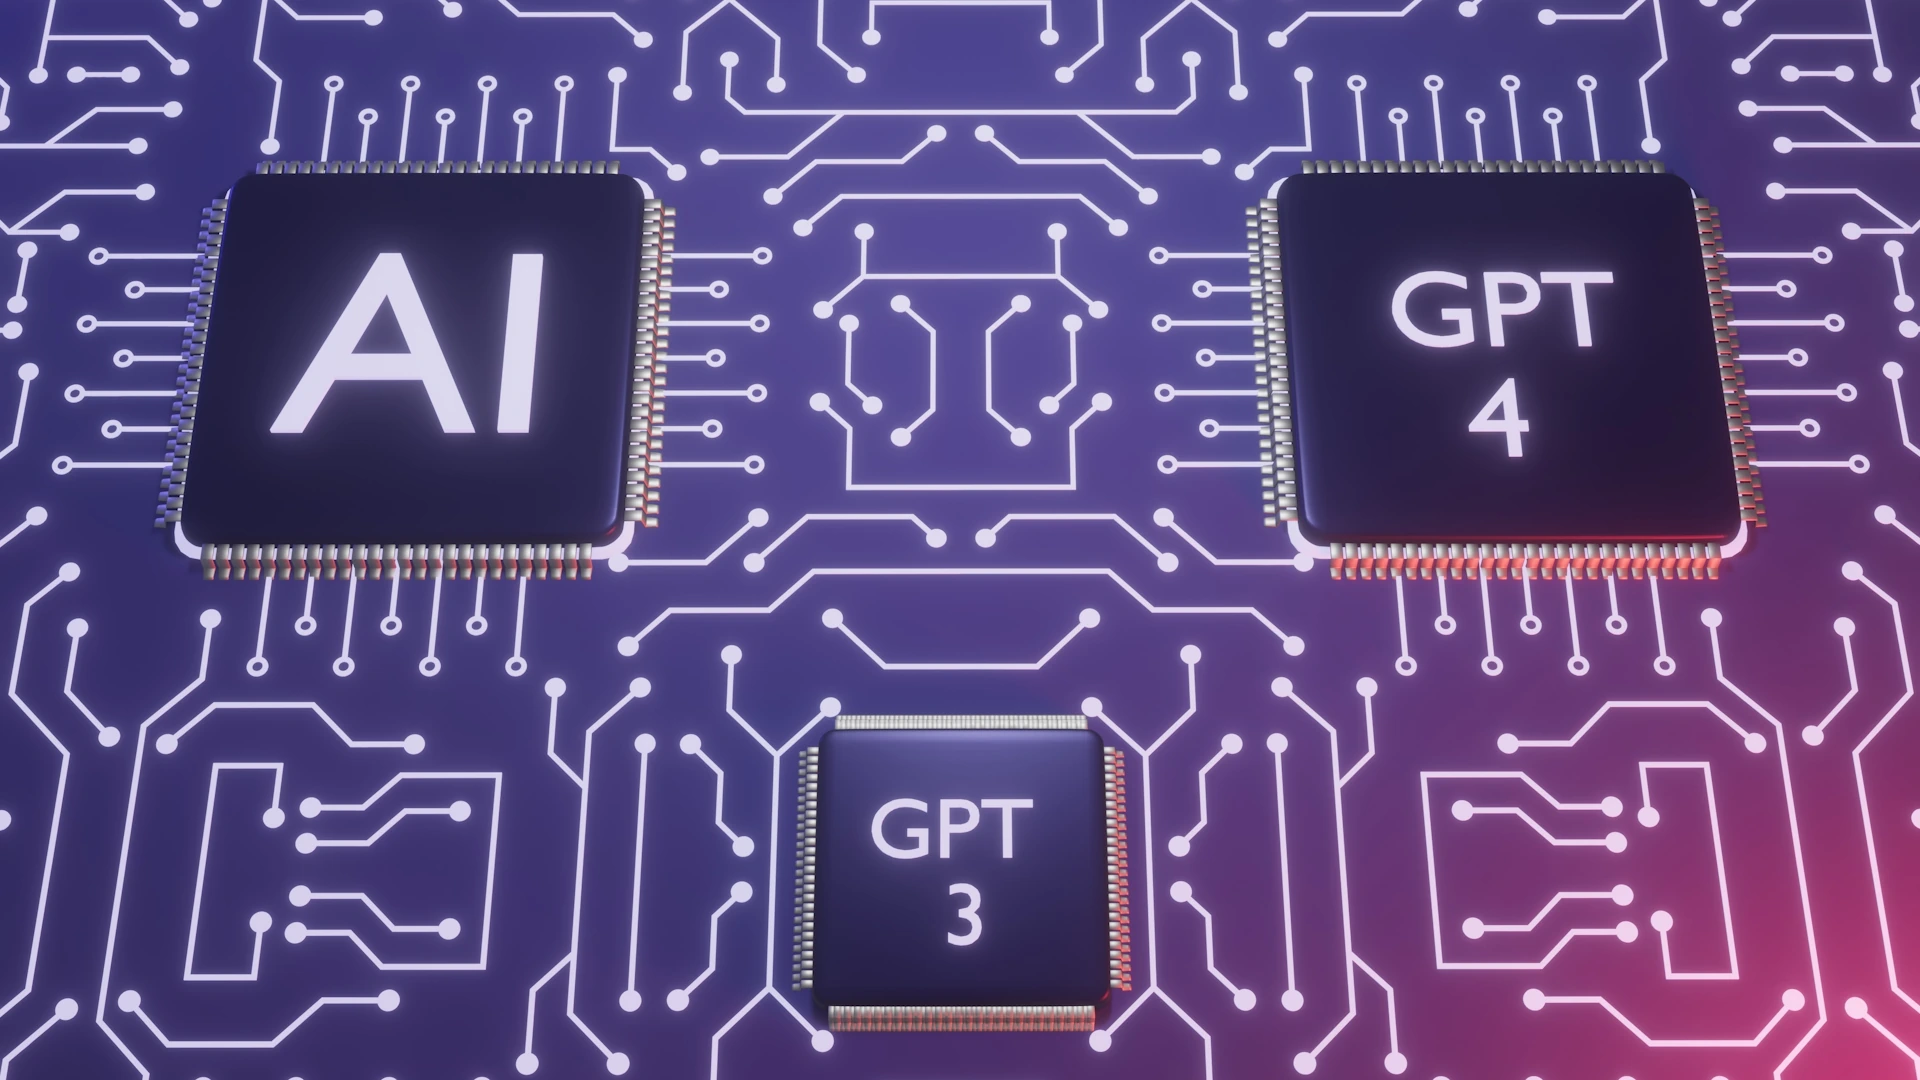 OpenAI appears to be considering making its own chips